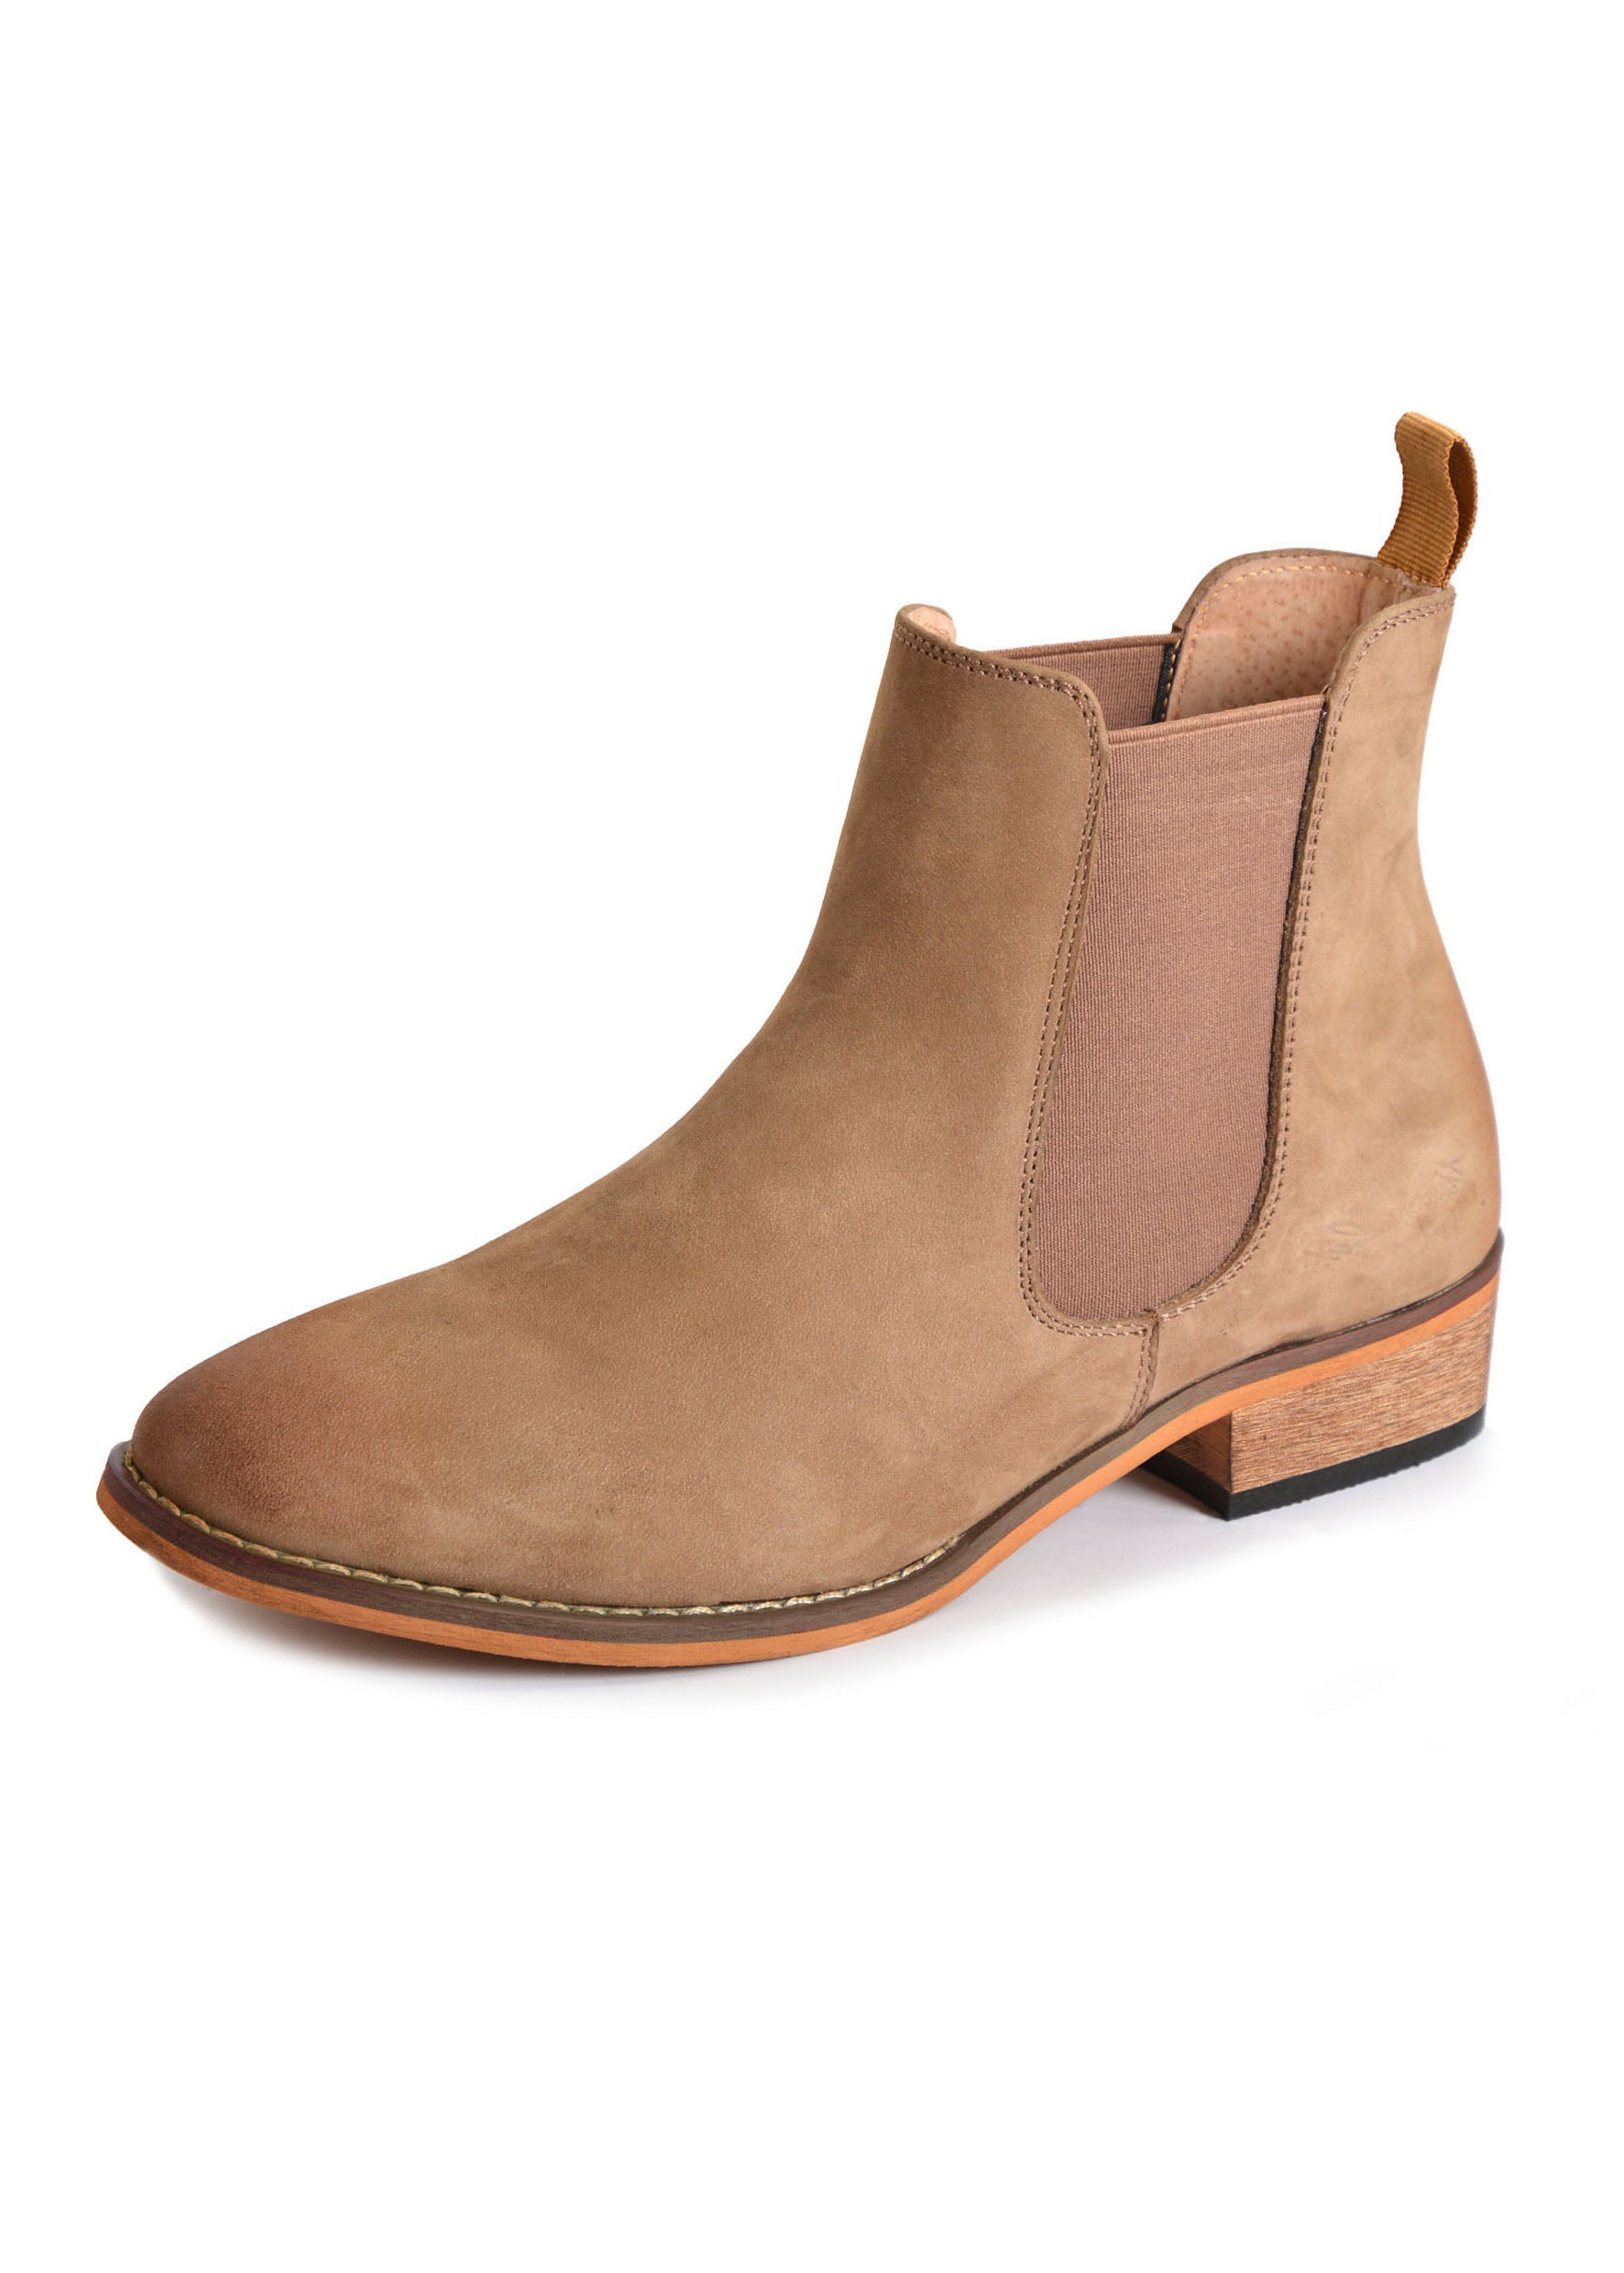 Thomas Cook Chelsea Boot - CLEARANCE